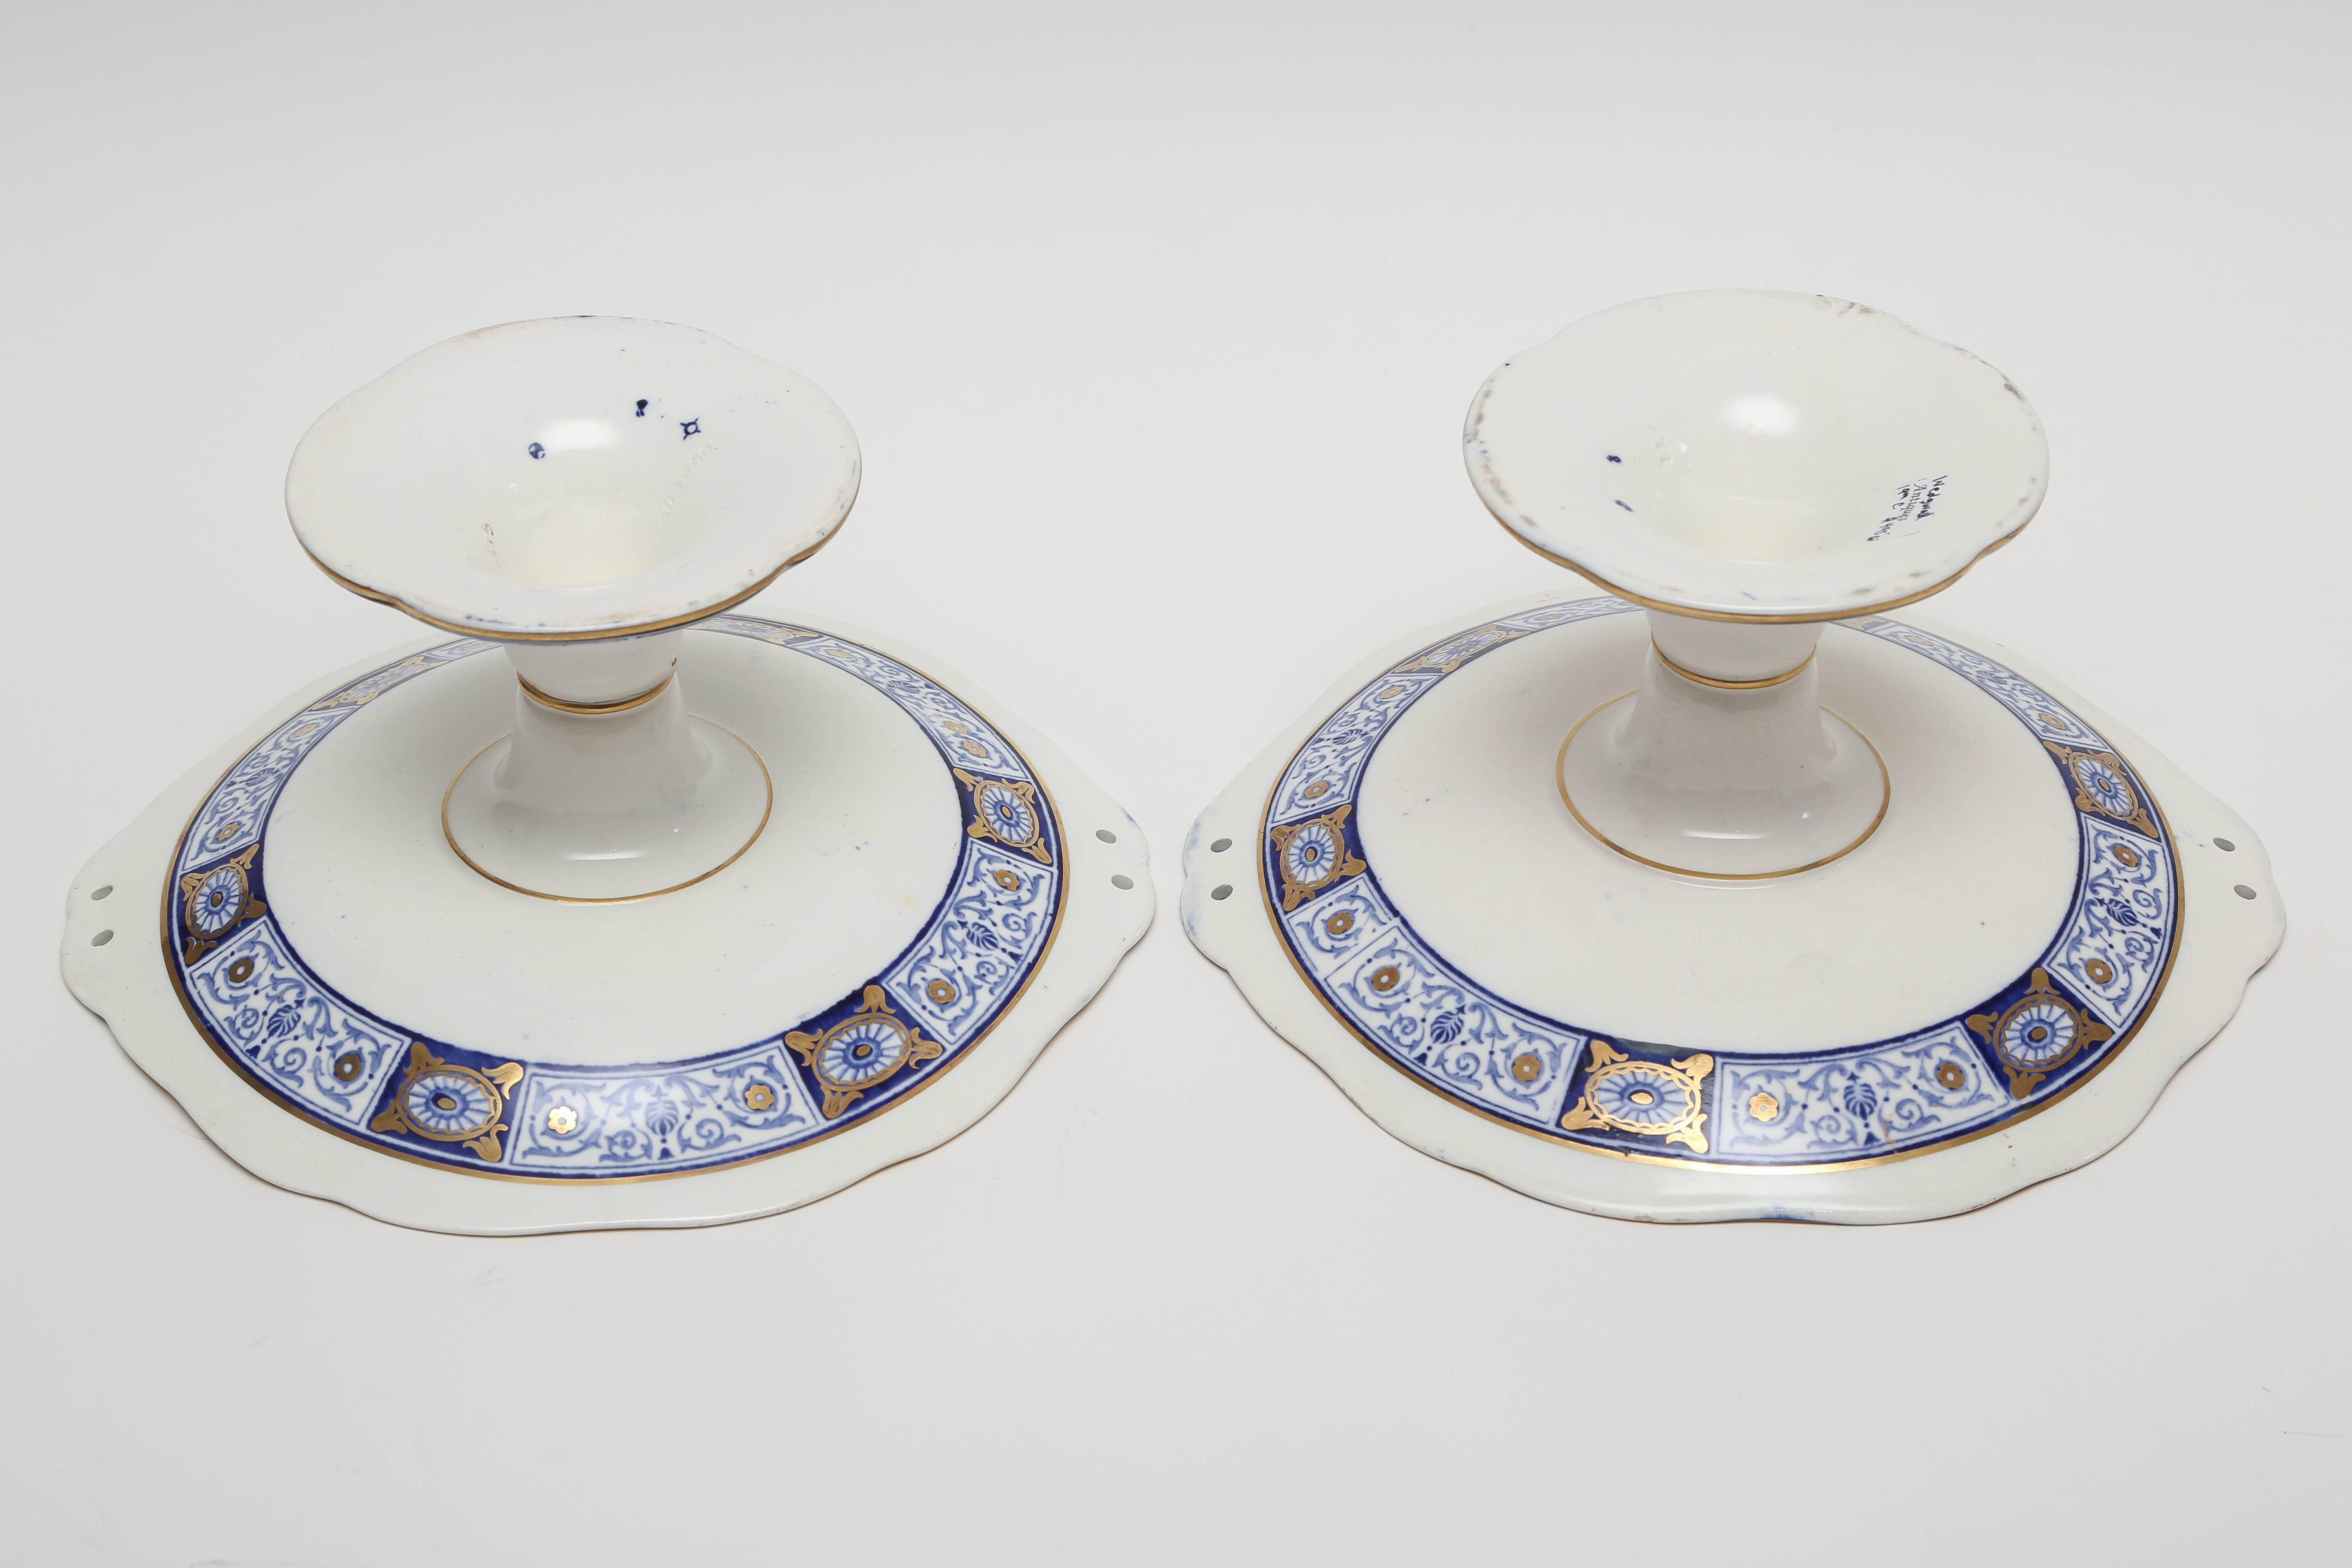 Late 19th Century Pair of 19th Century Wedgwood England Dessert Compotes or Tazzas, Blue and Gold